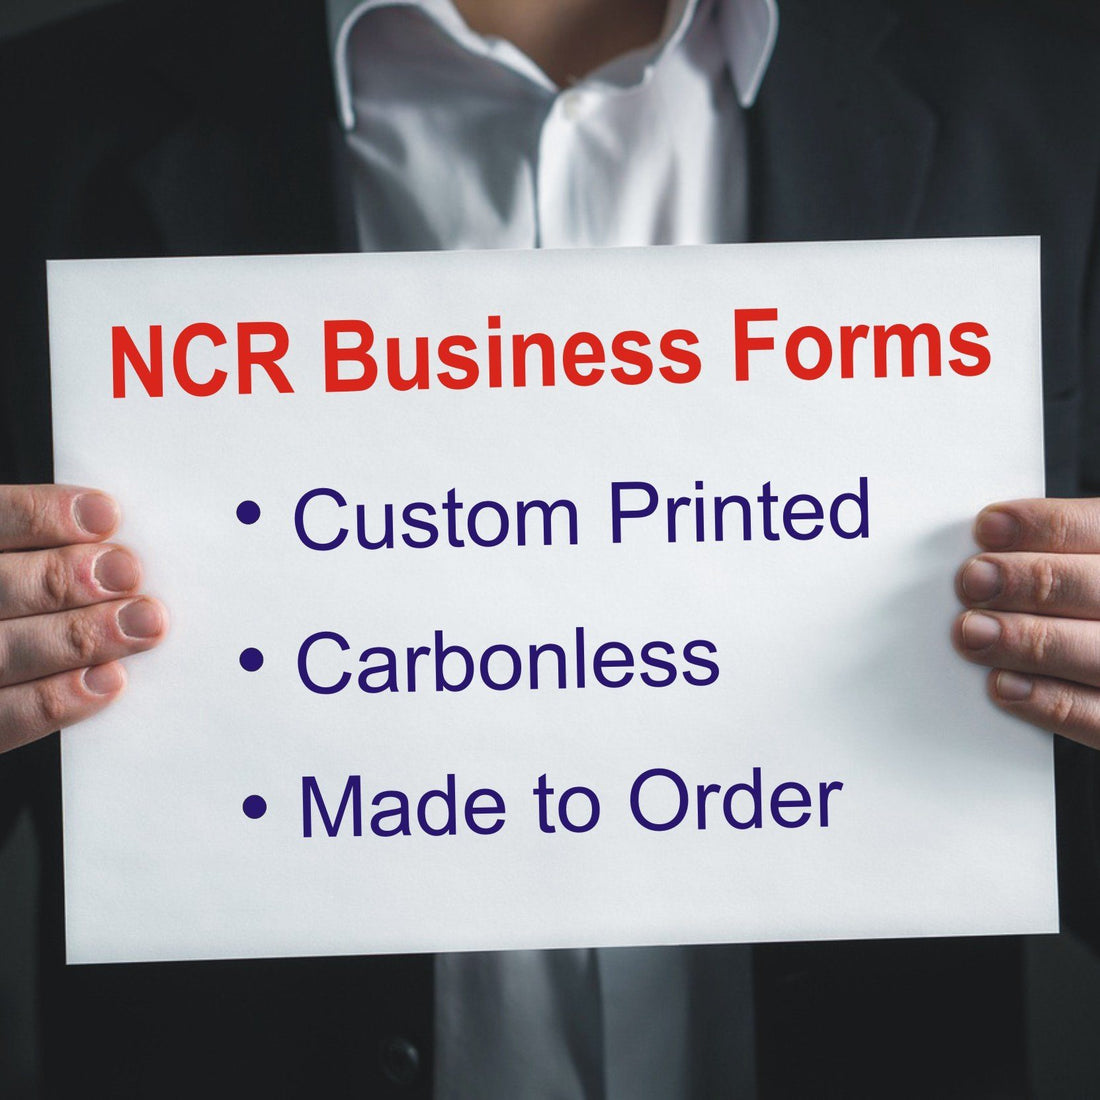 Carbonless NCR Business Forms - Custom Printed